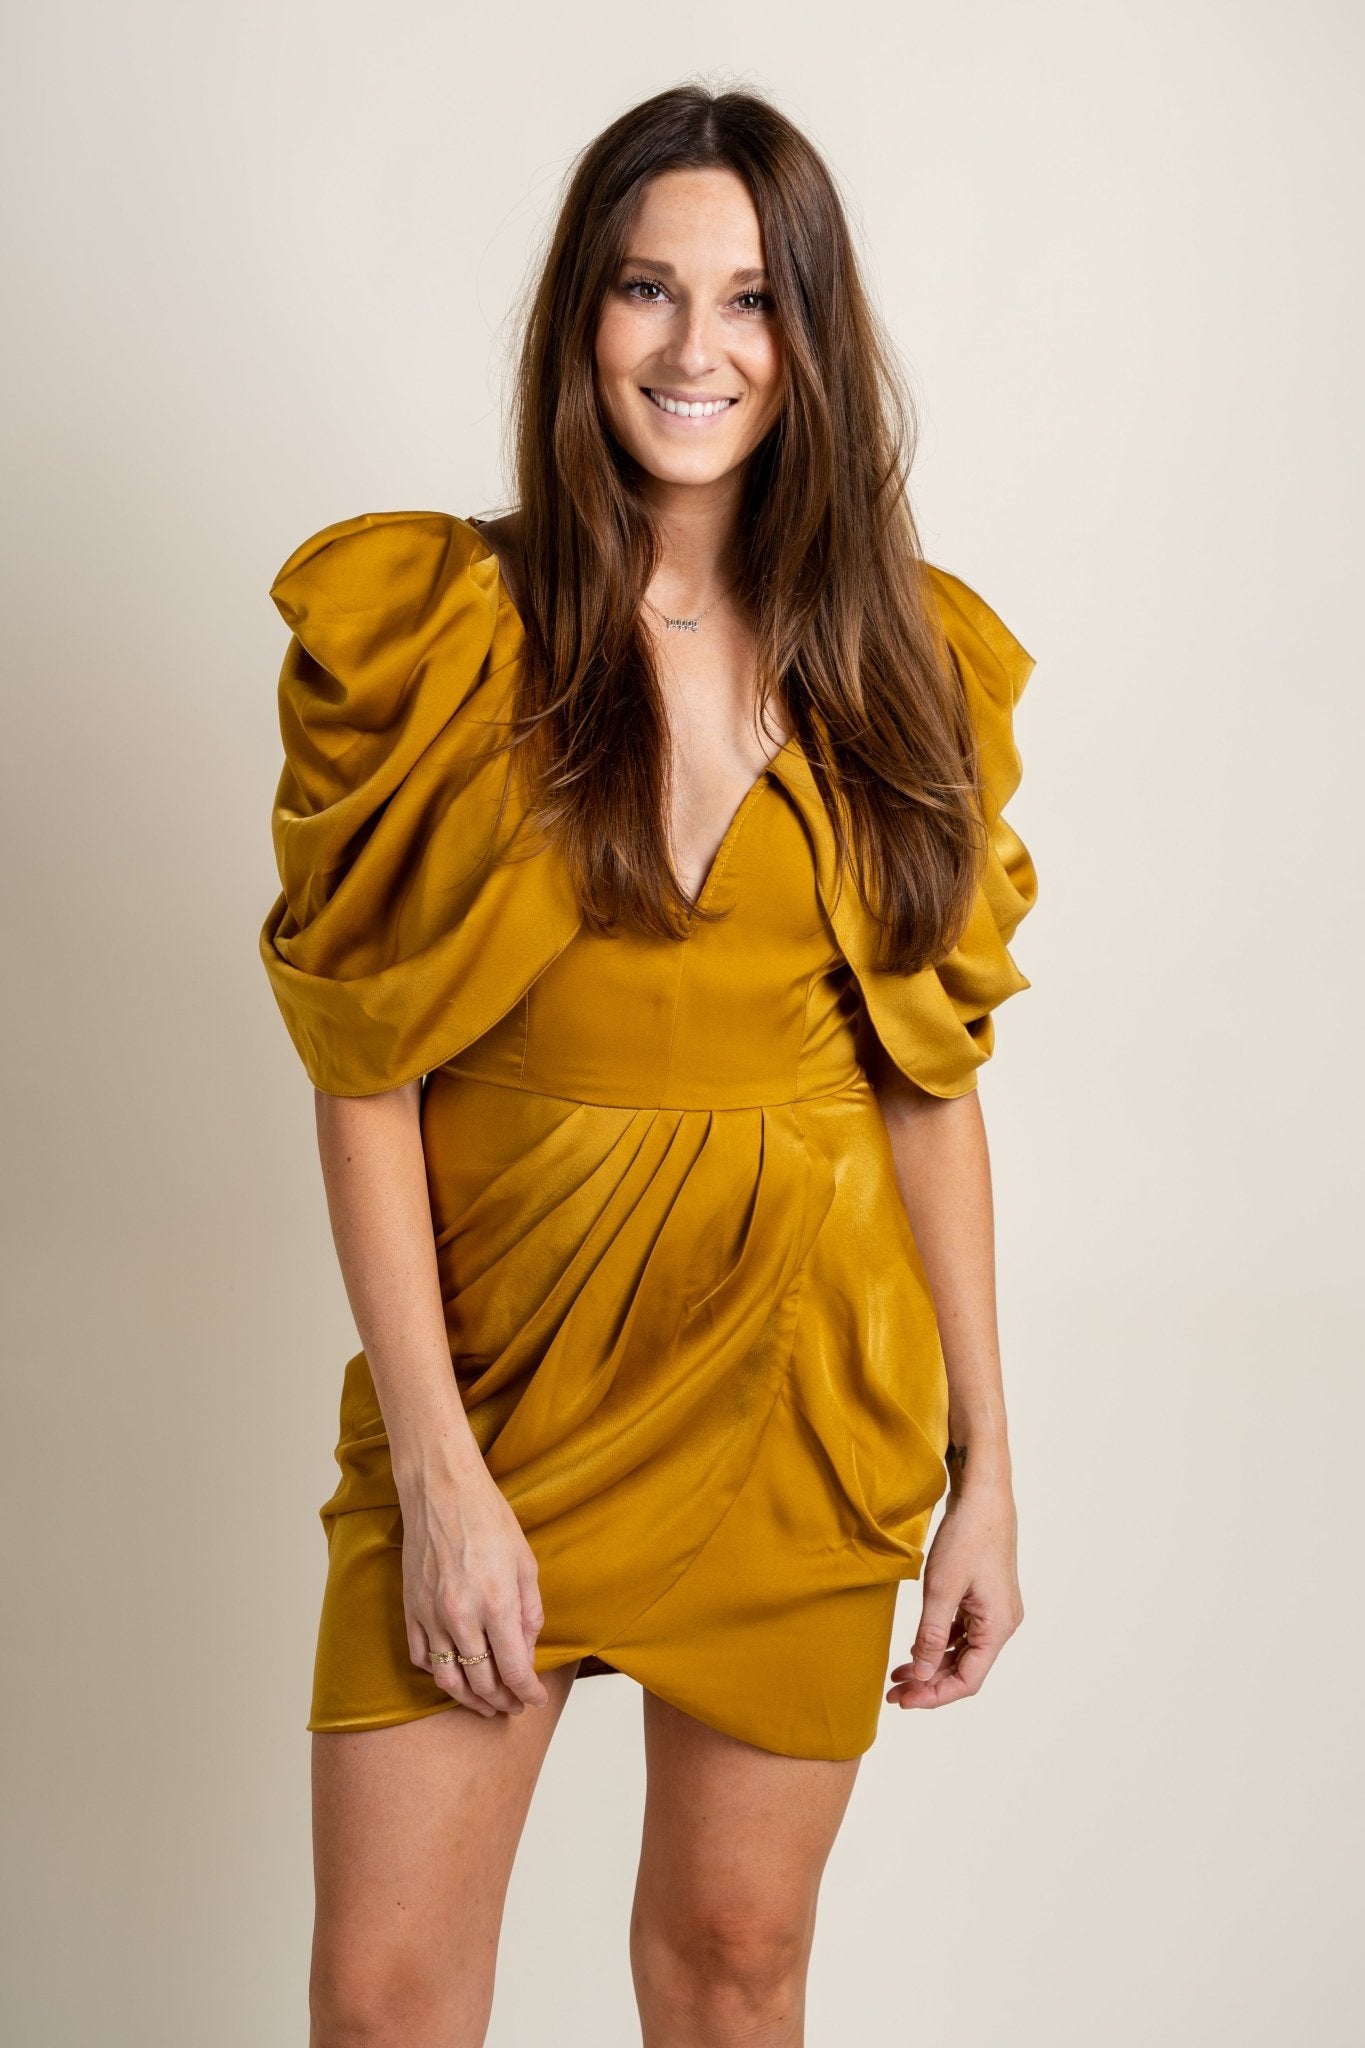 Draped sleeve satin dress olive oil - Affordable Dress - Boutique Dresses at Lush Fashion Lounge Boutique in Oklahoma City